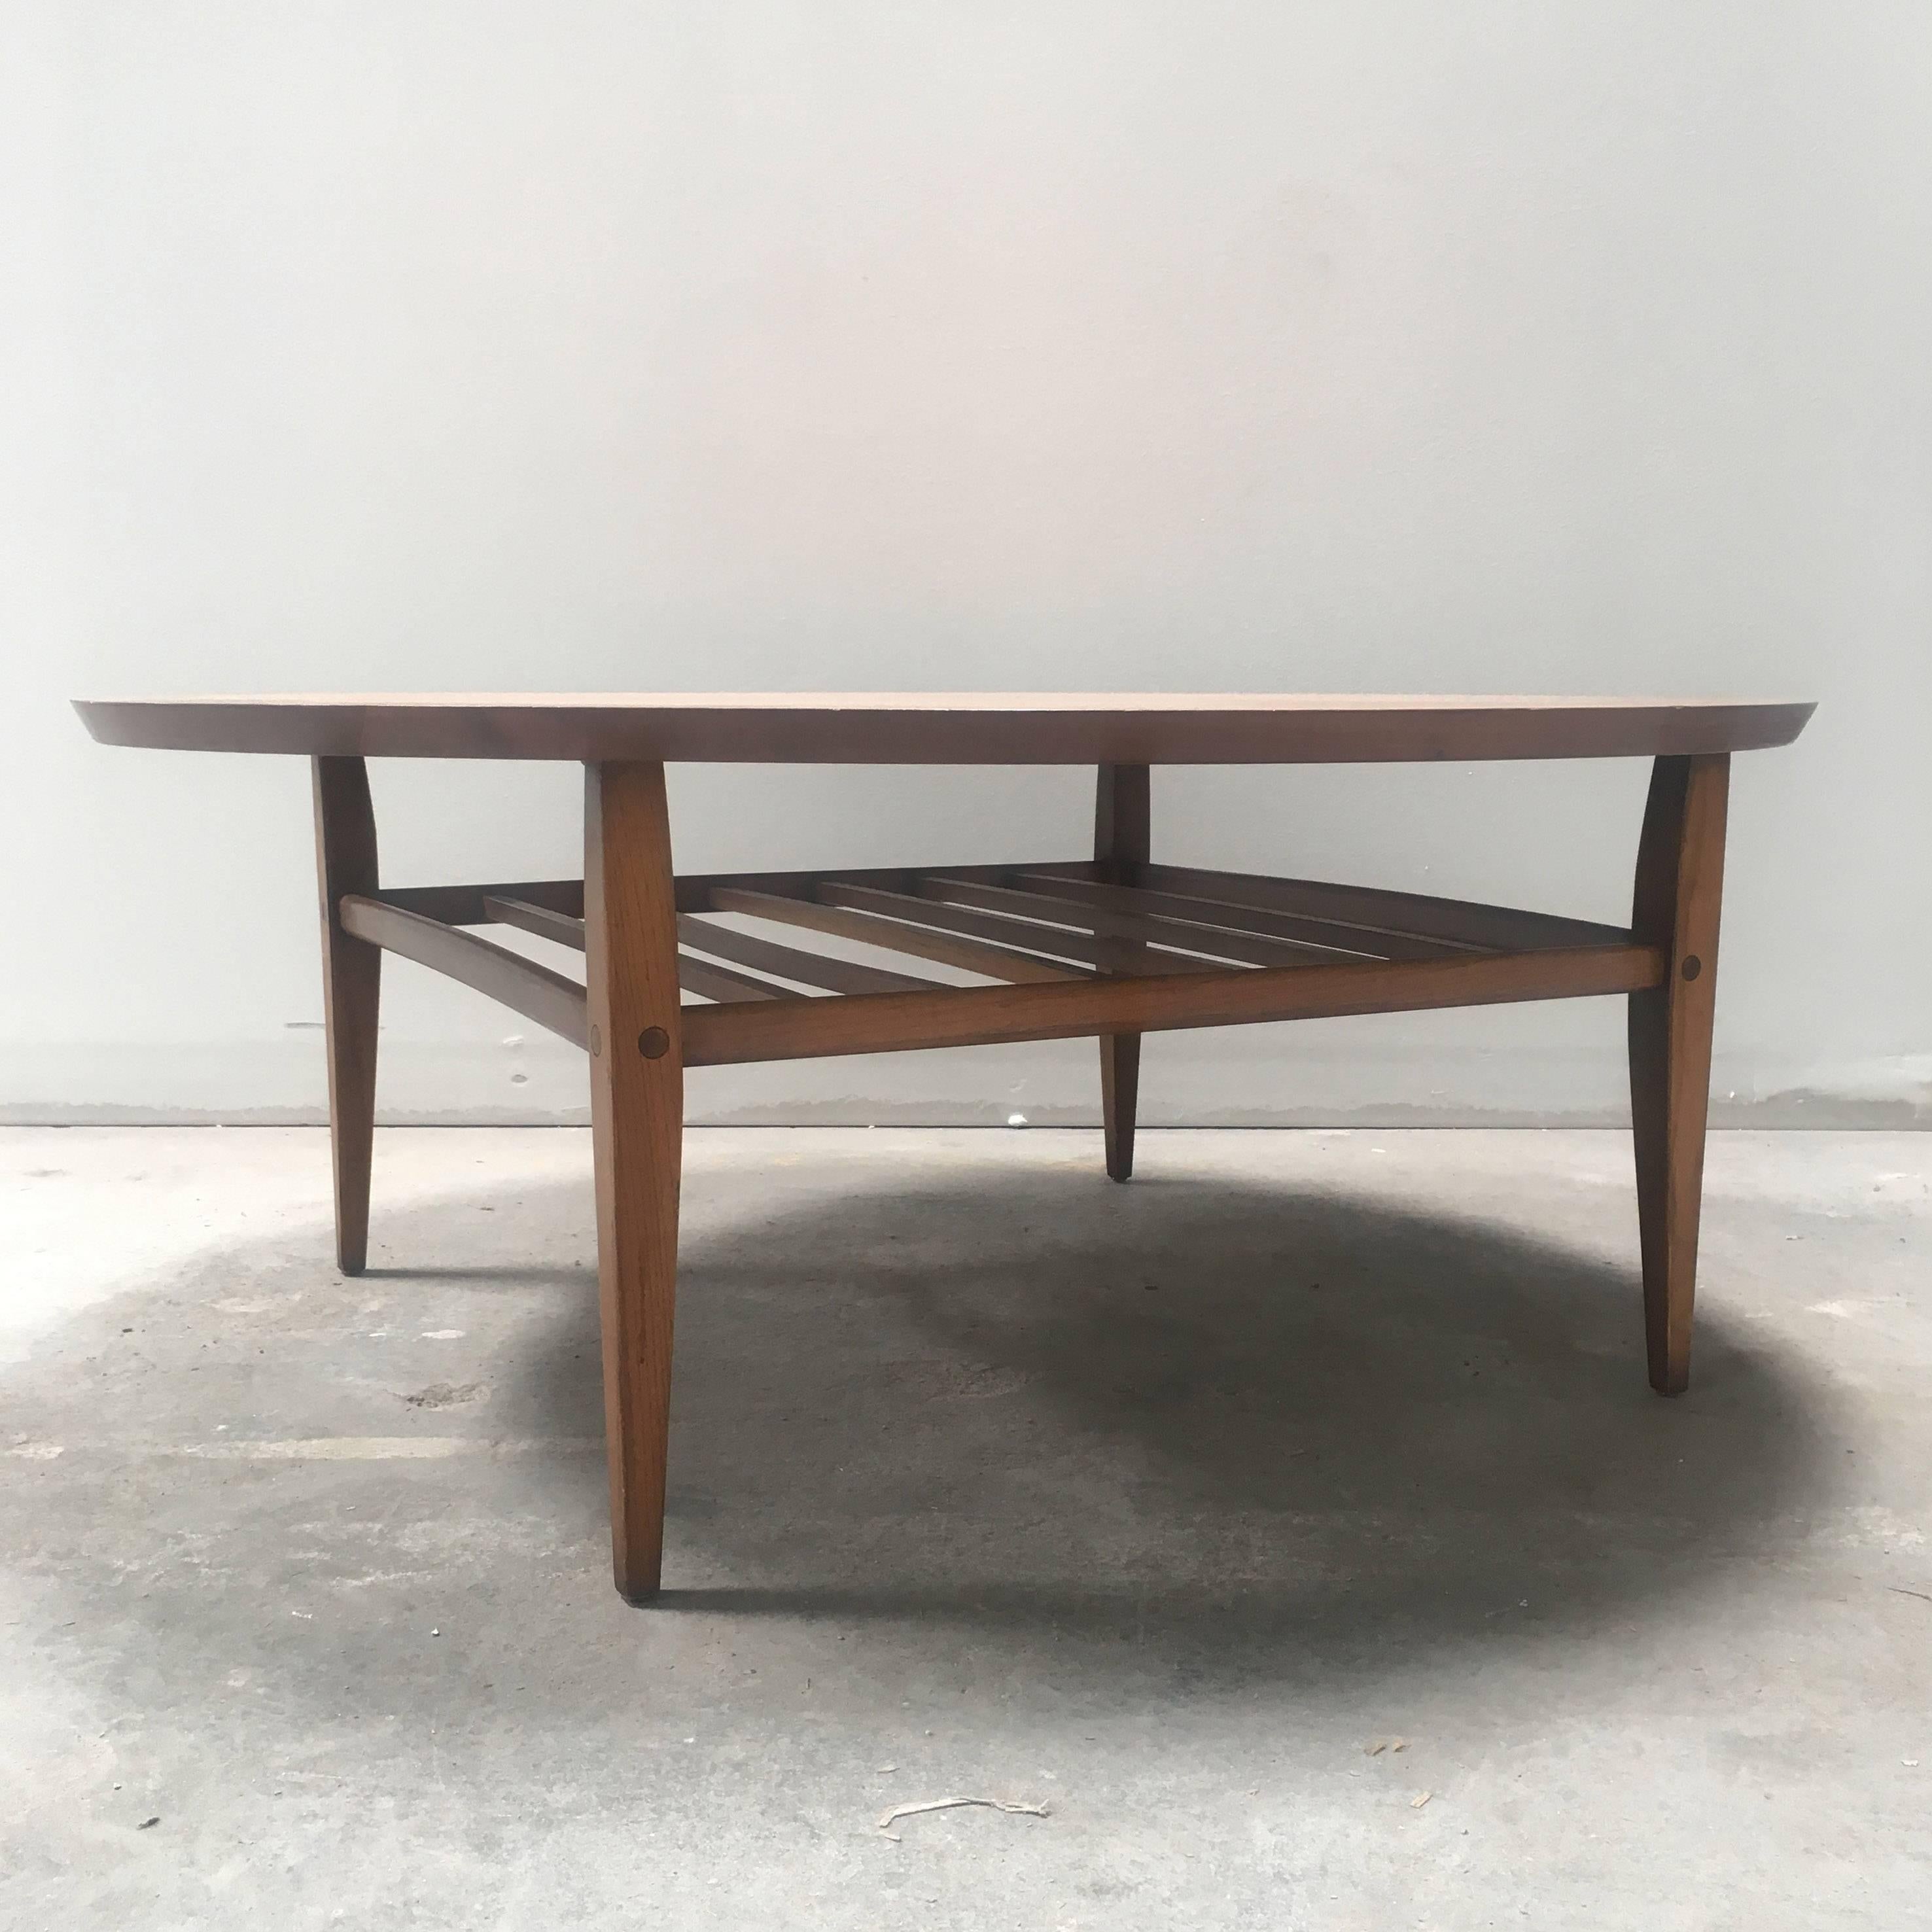 Mid-Century coffee table with slatted shelf underneath the tabletop. Four tapered legs with beautiful ridge details. Label reads 